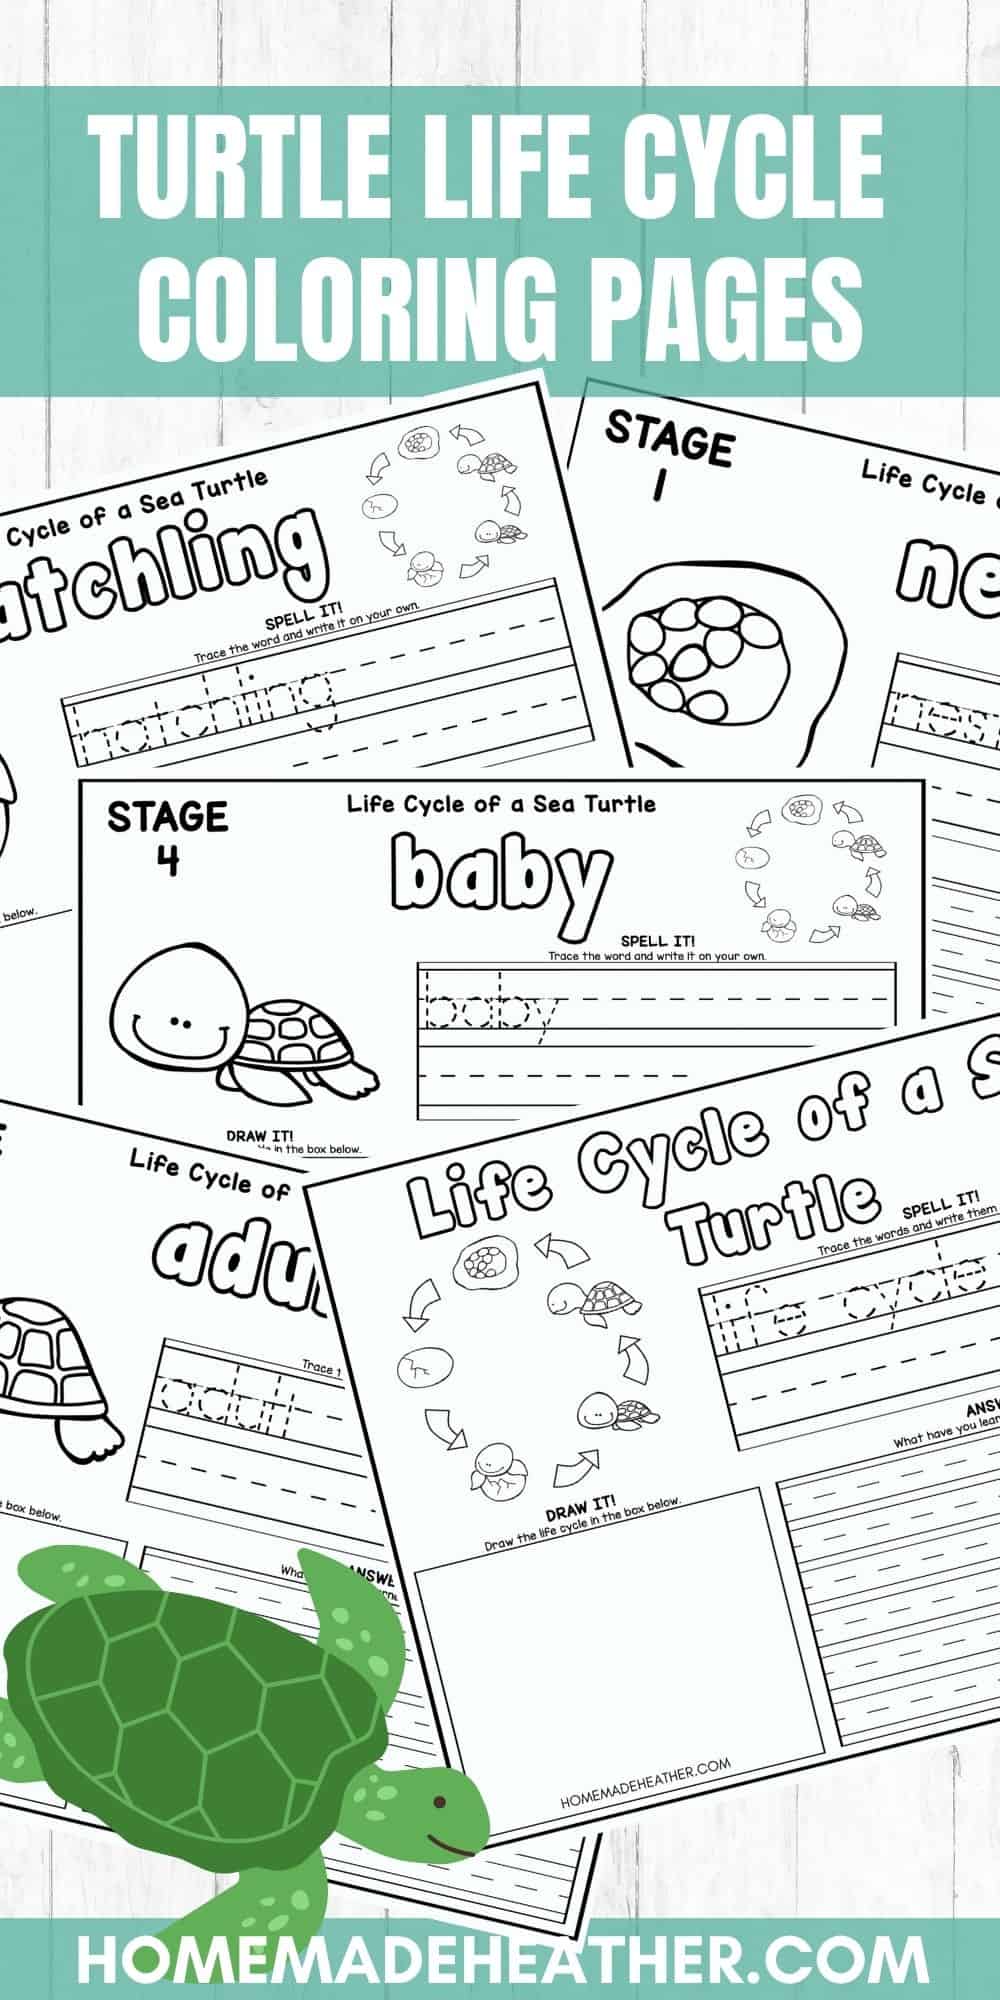 Turtle life cycle coloring pages homemade heather